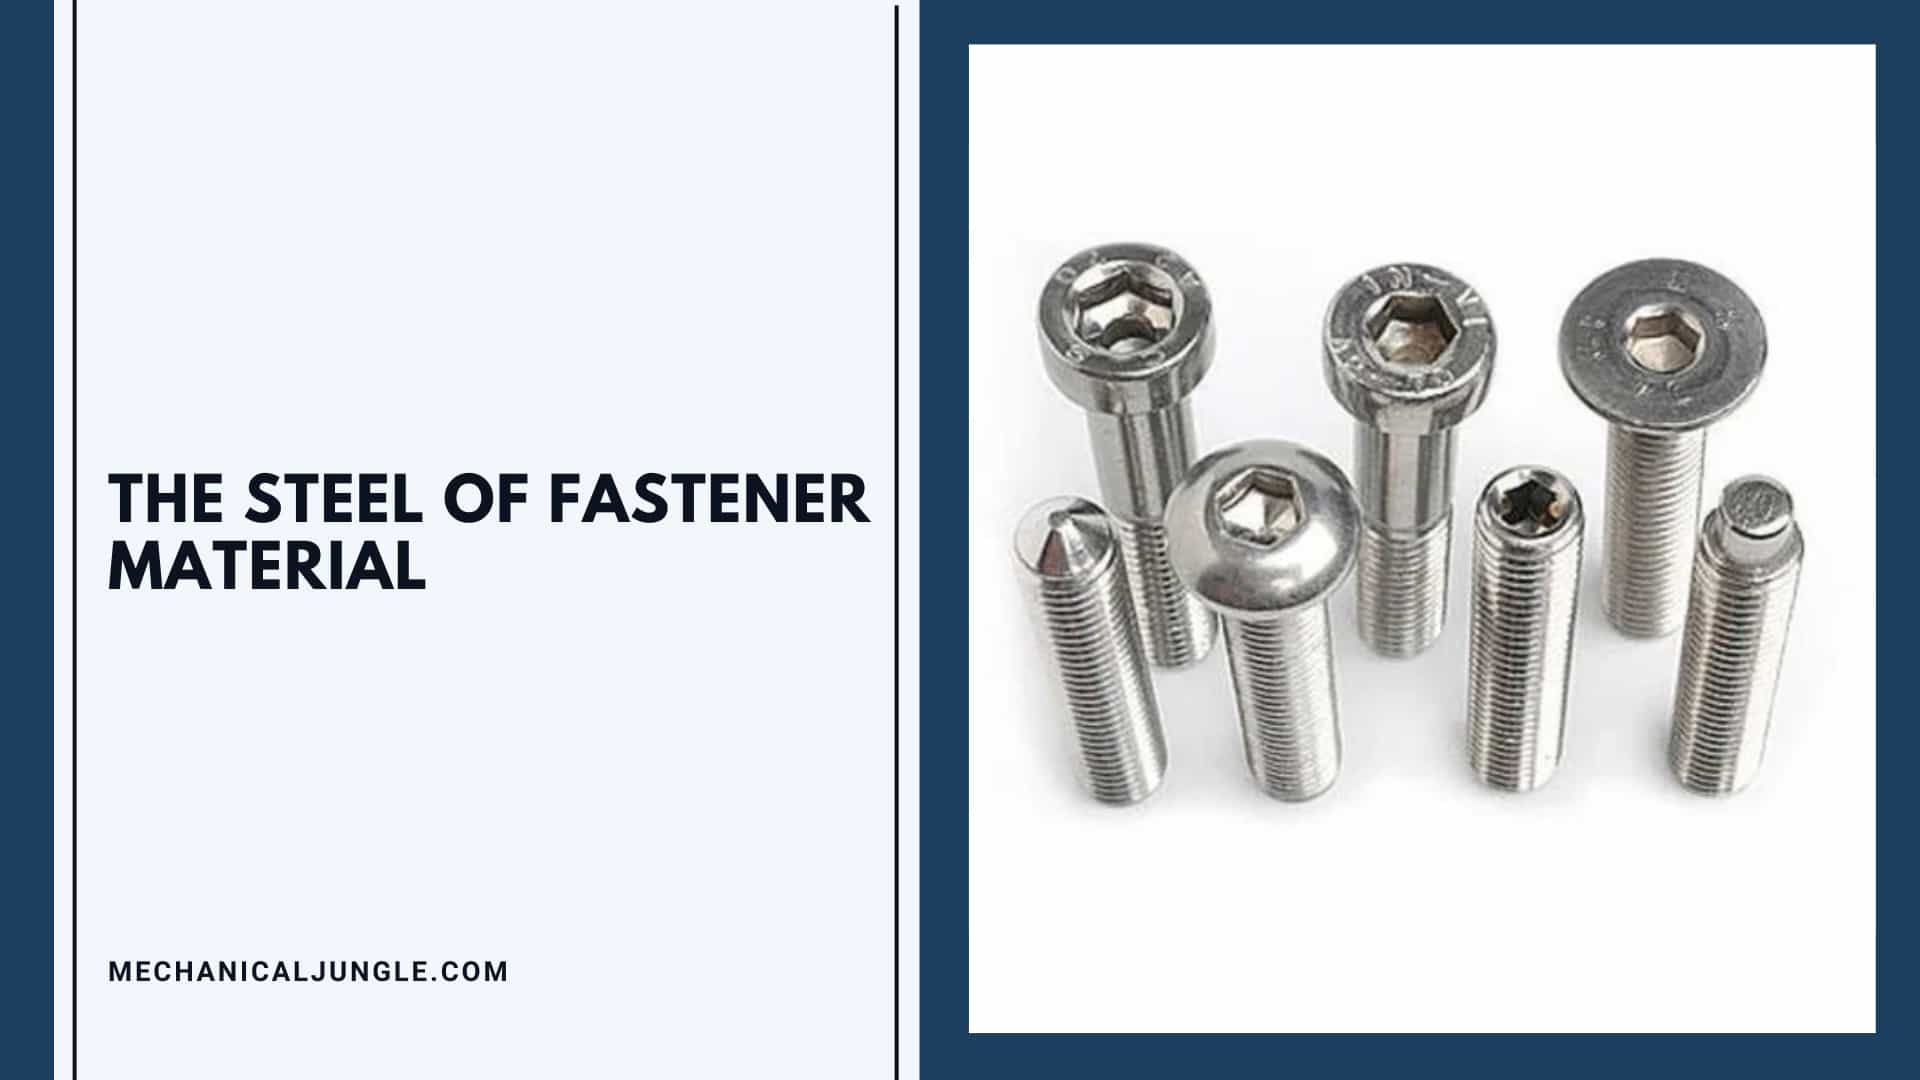 The Steel of Fastener Material